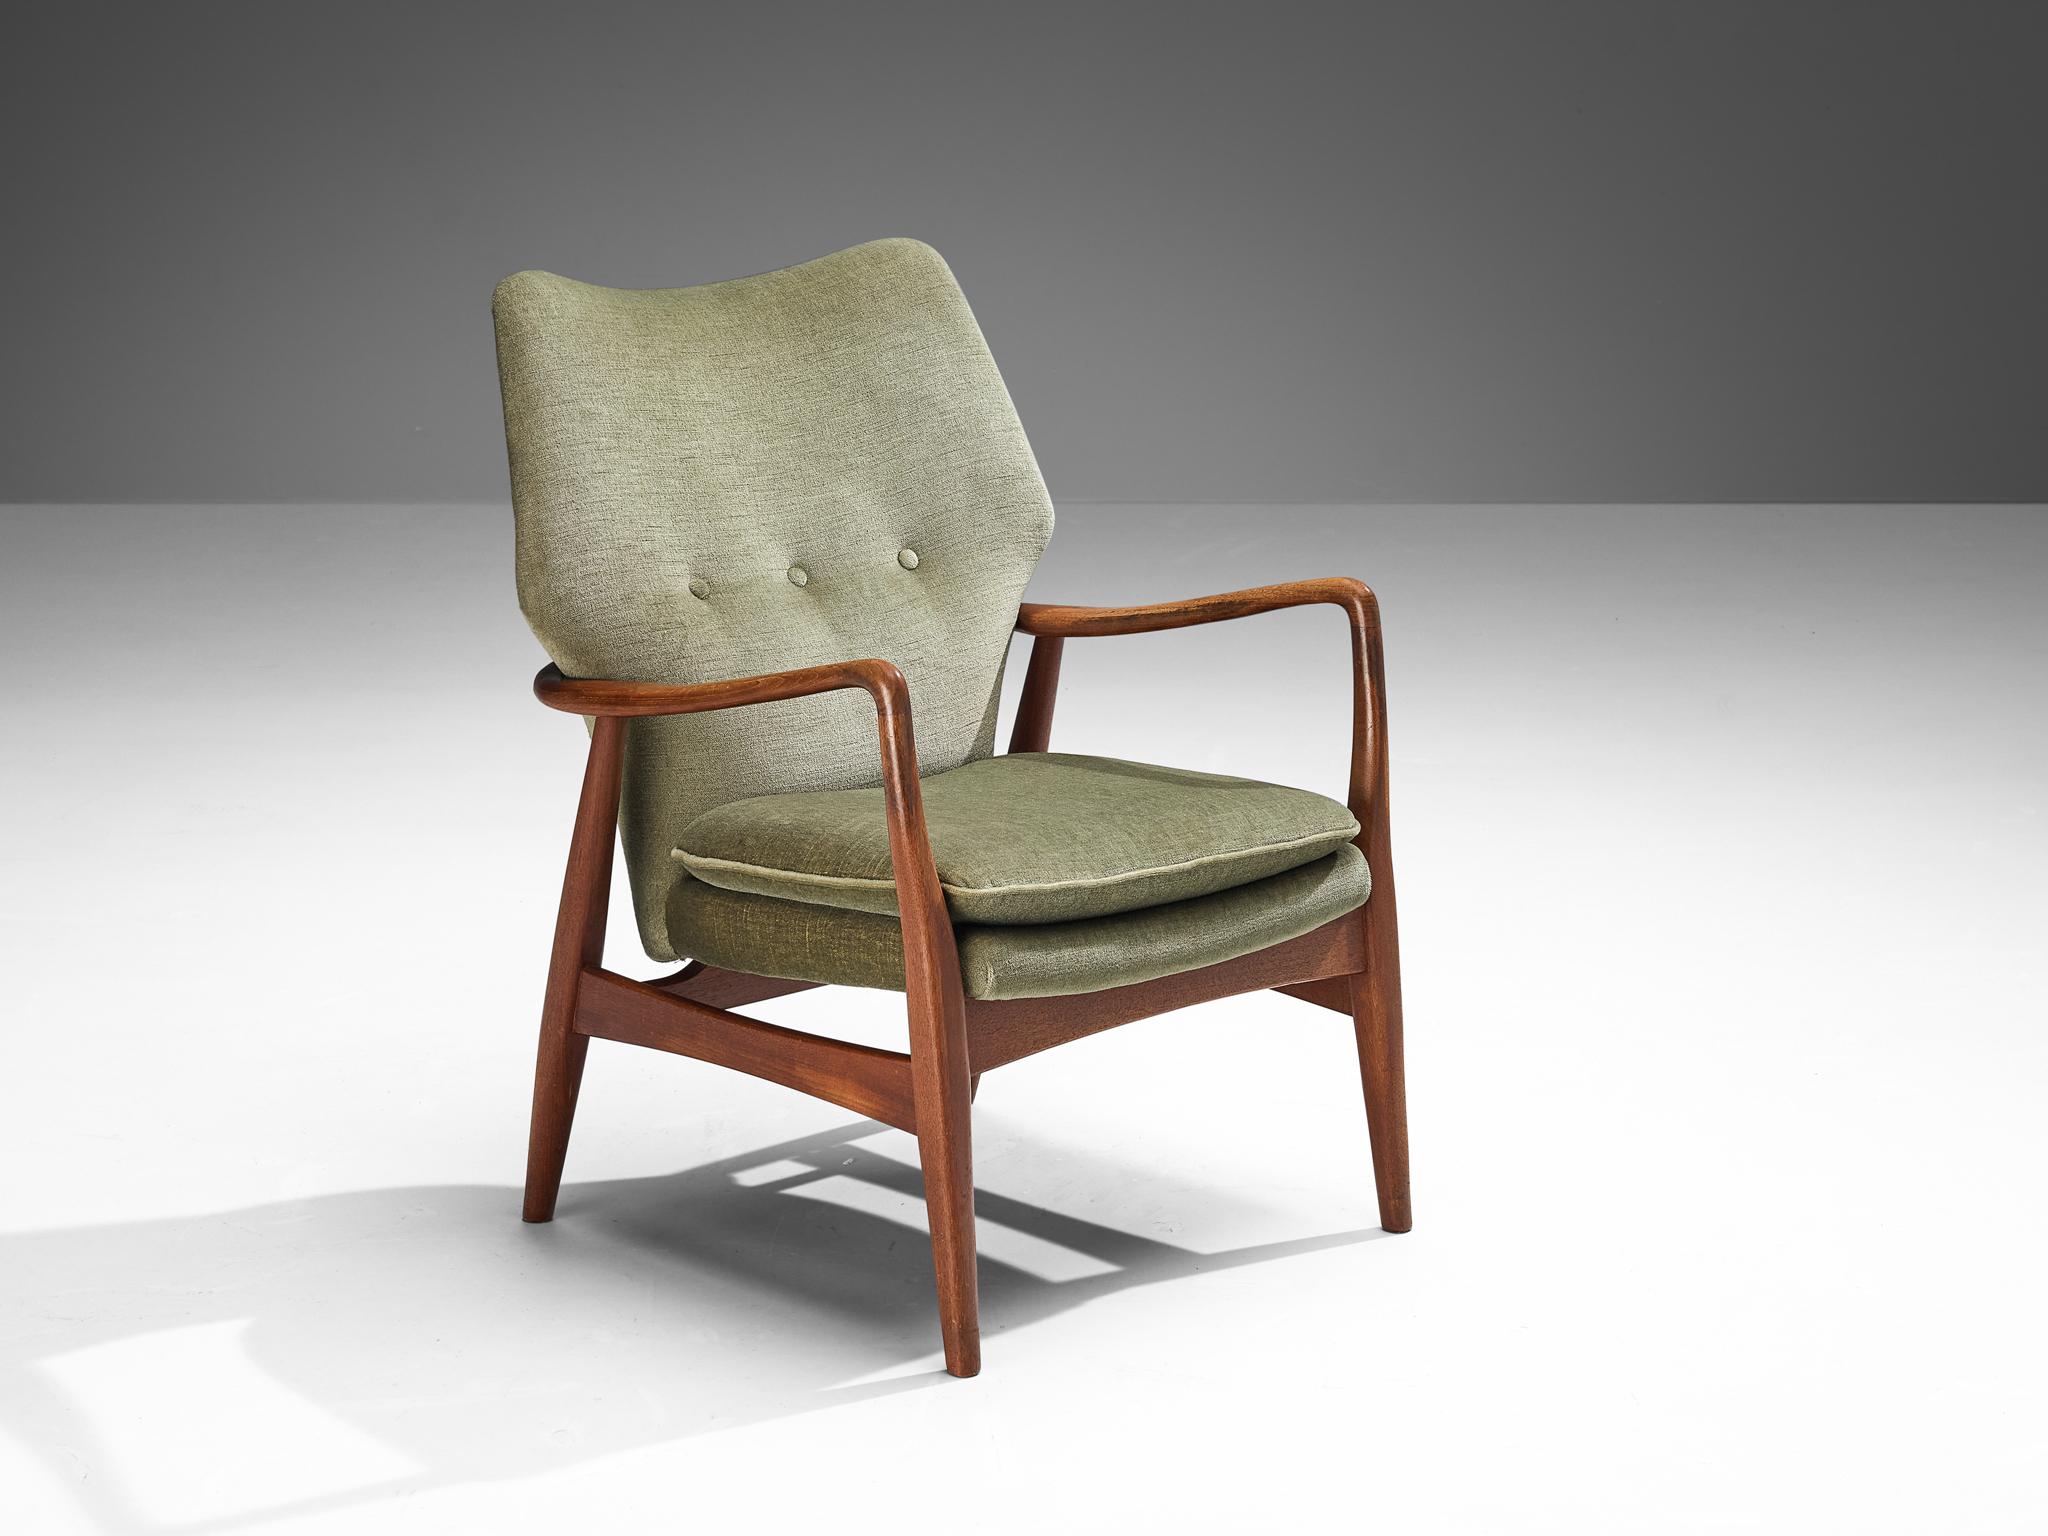 Aksel Bender Madsen for Bovenkamp, teak, fabric, Denmark, 1950s

This lounge chair by Aksel Bender Madsen is produced by Bovenkamp. The Danish designer once again proved his great eye for detail and high-level of craftsmanship this lounge chair is